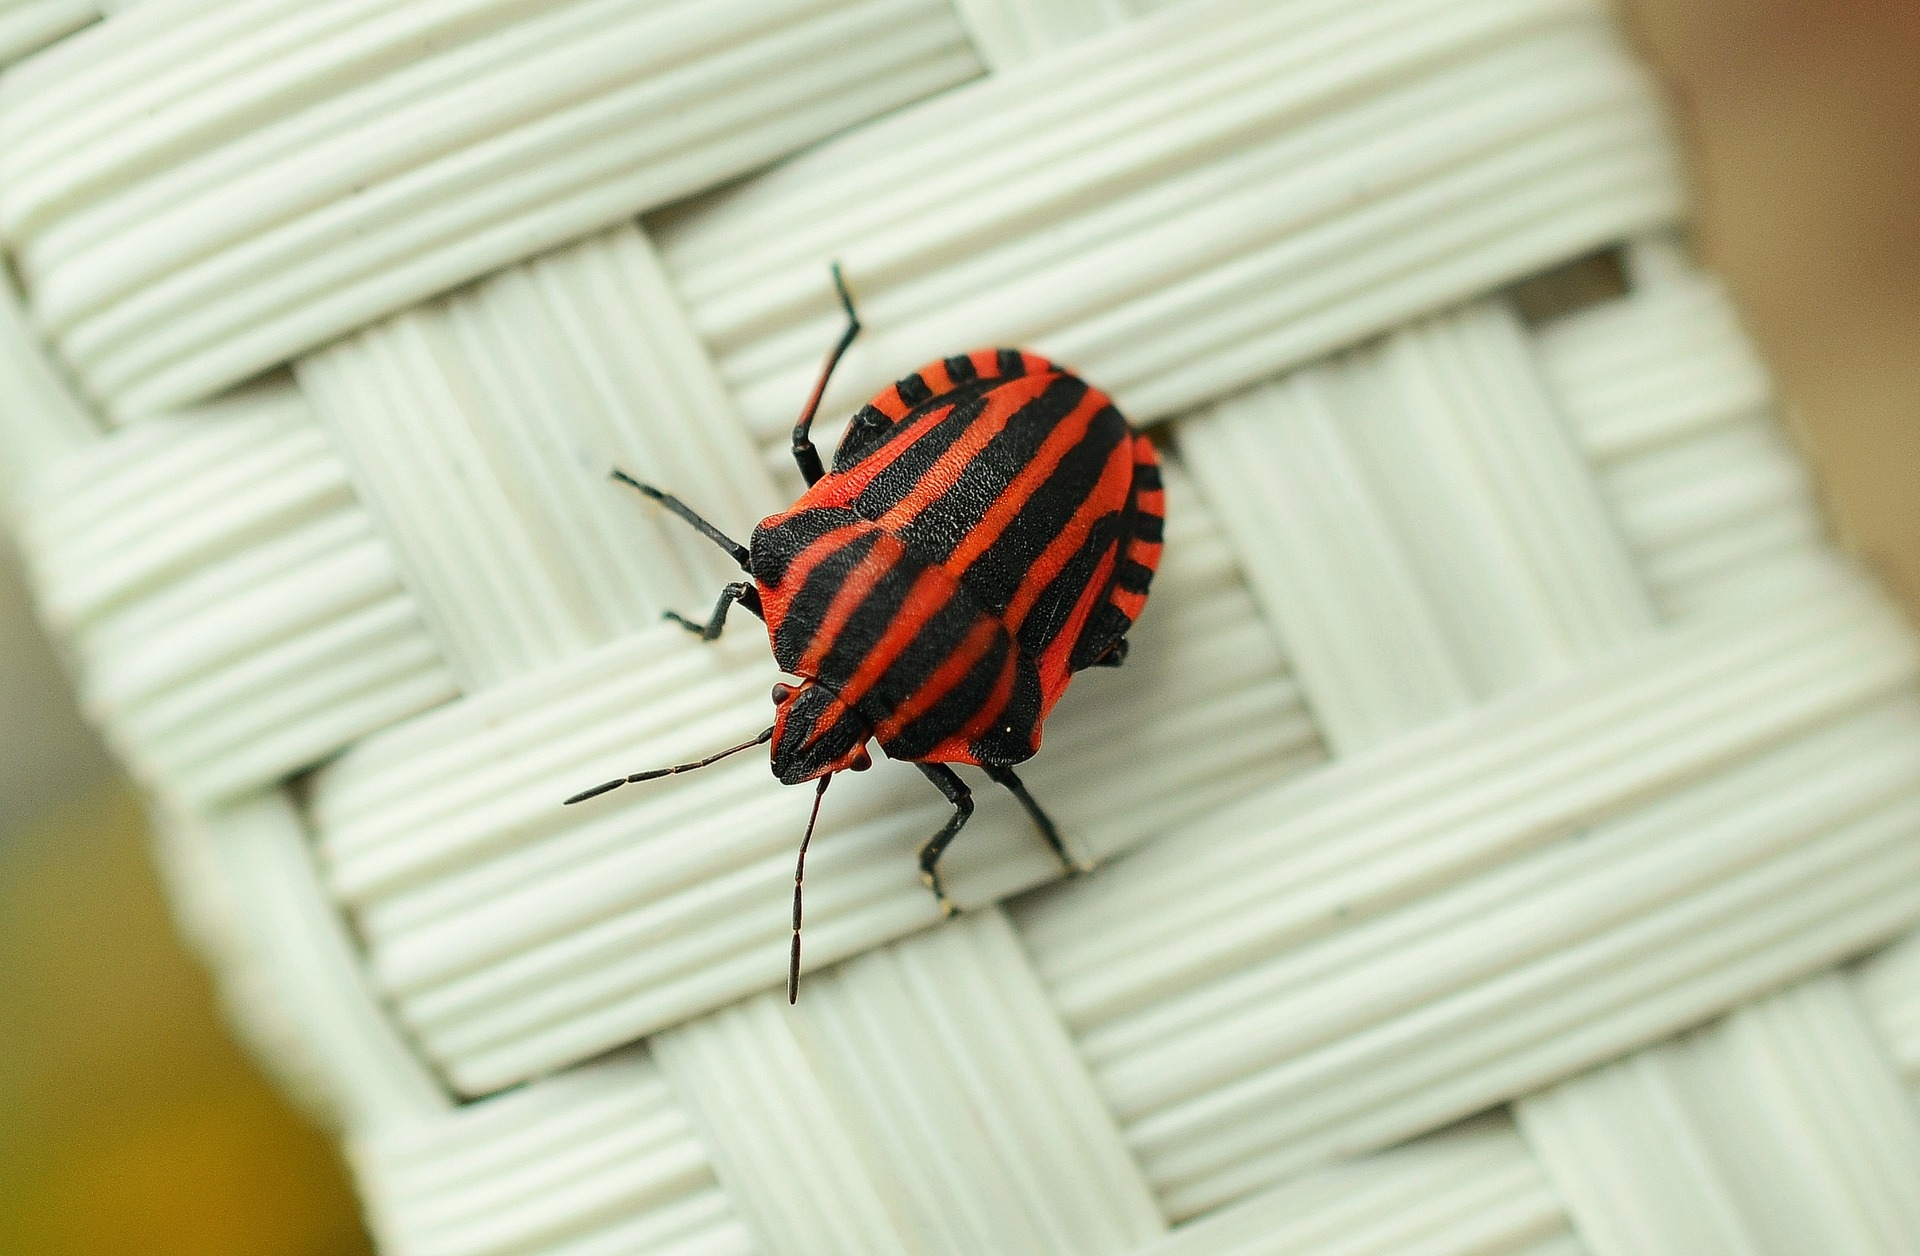 Image of a bug